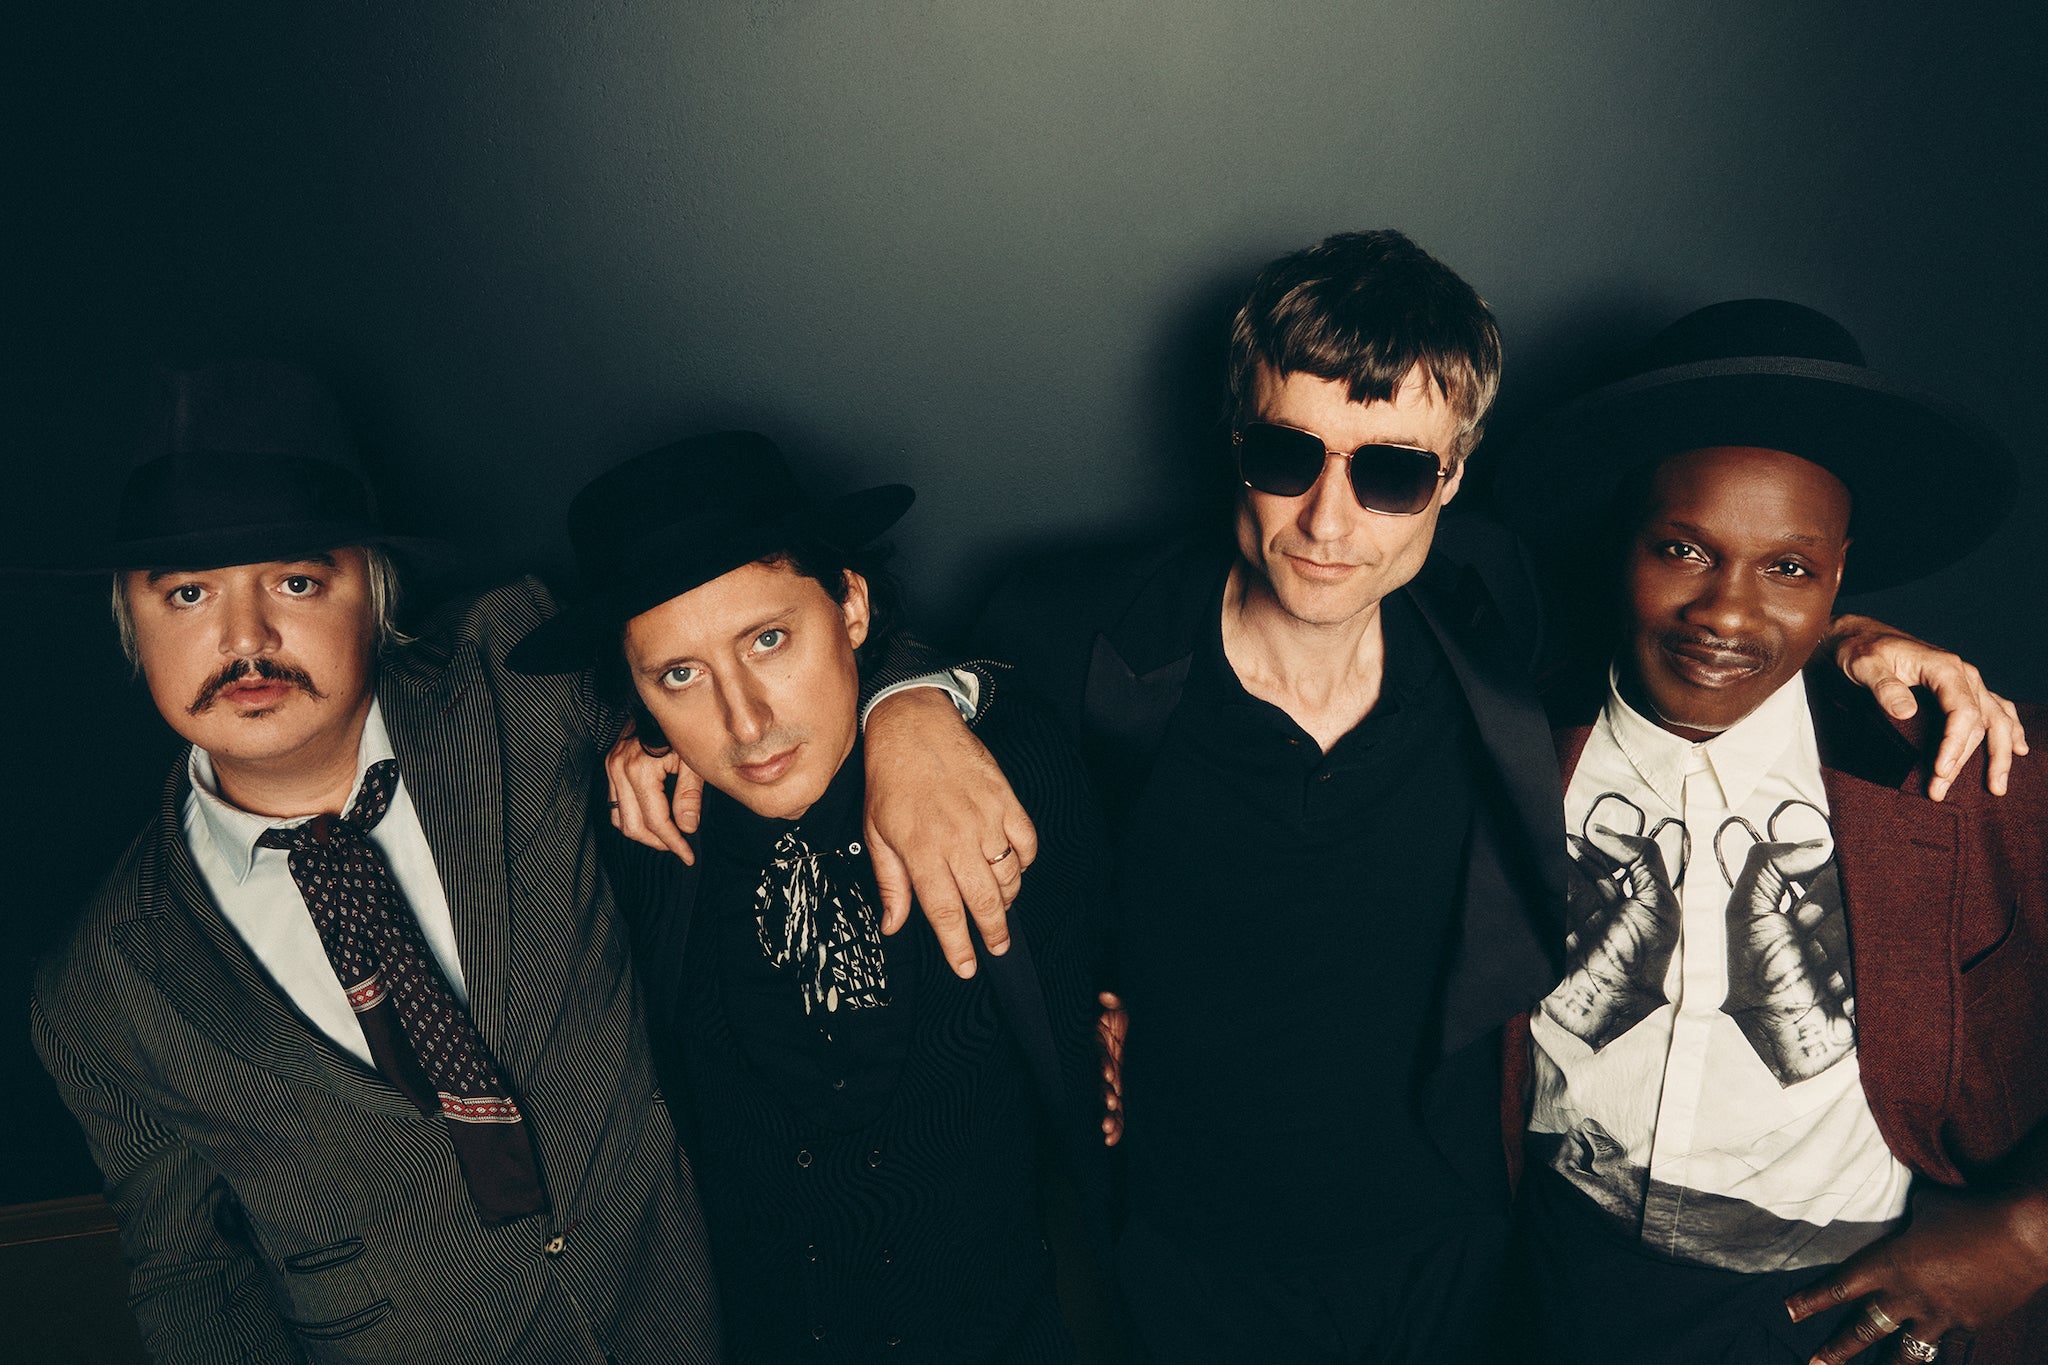 ‘All Quiet on the Eastern Esplanade’ is easily The Libertines’ most ambitious and expansive record to date